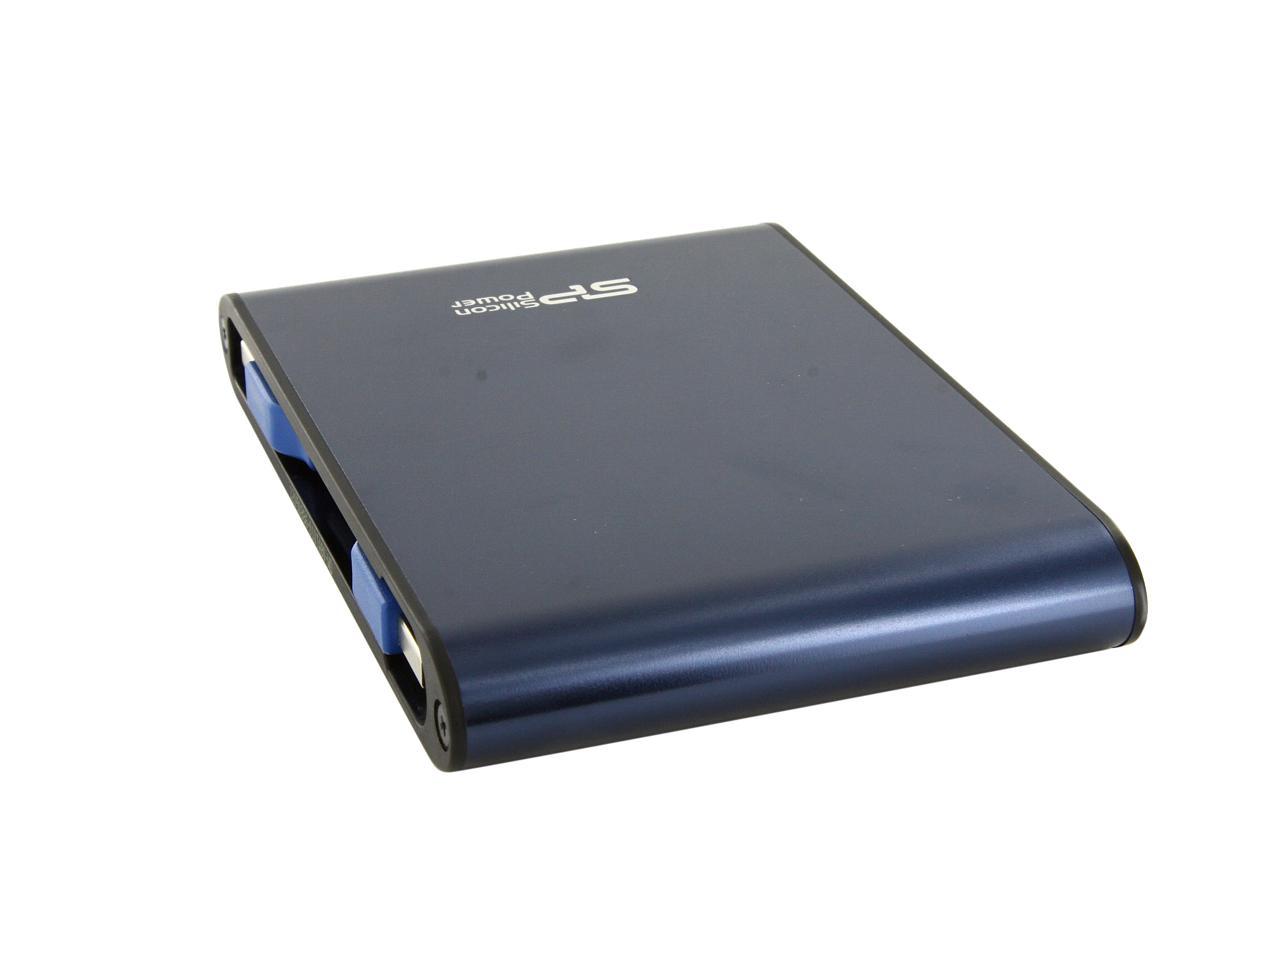 1tb silicon power type c external usb 3.0 hrad drive for mac